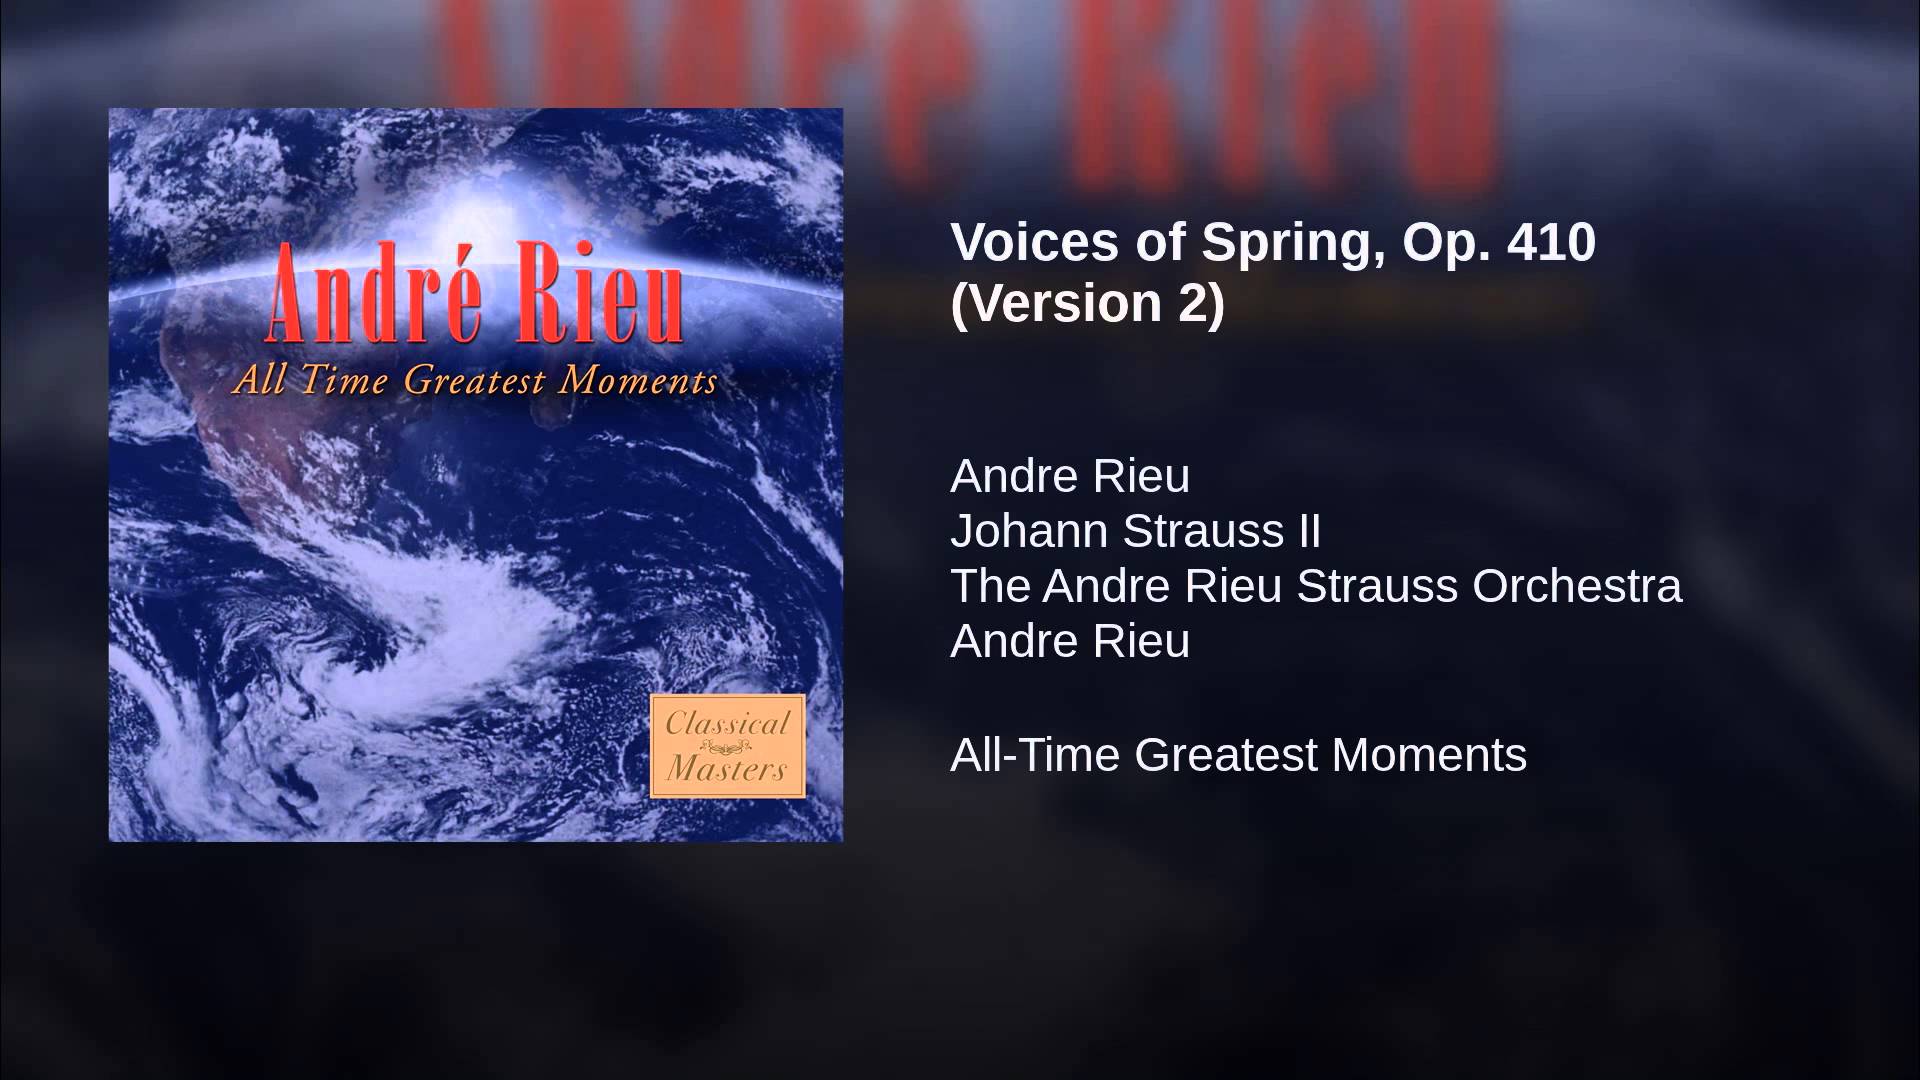 Voices of Spring, Op. 410 (Version 2) - YouTube